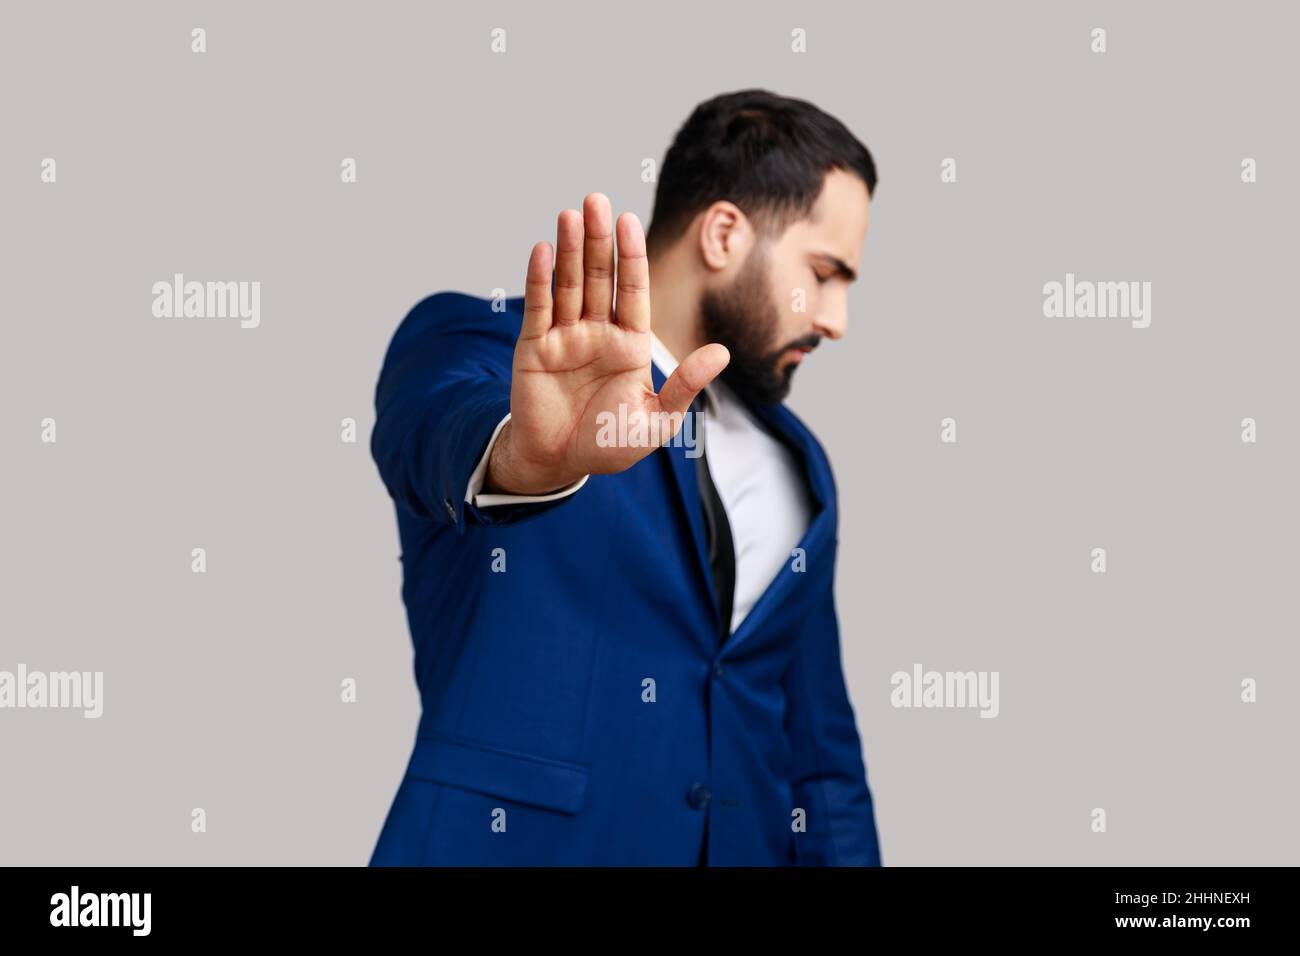 Bearded man making stop gesture showing palm of hand and turning head aside, conflict prohibition warning about danger, stop bullying. Indoor studio shot isolated on gray background. Stock Photo